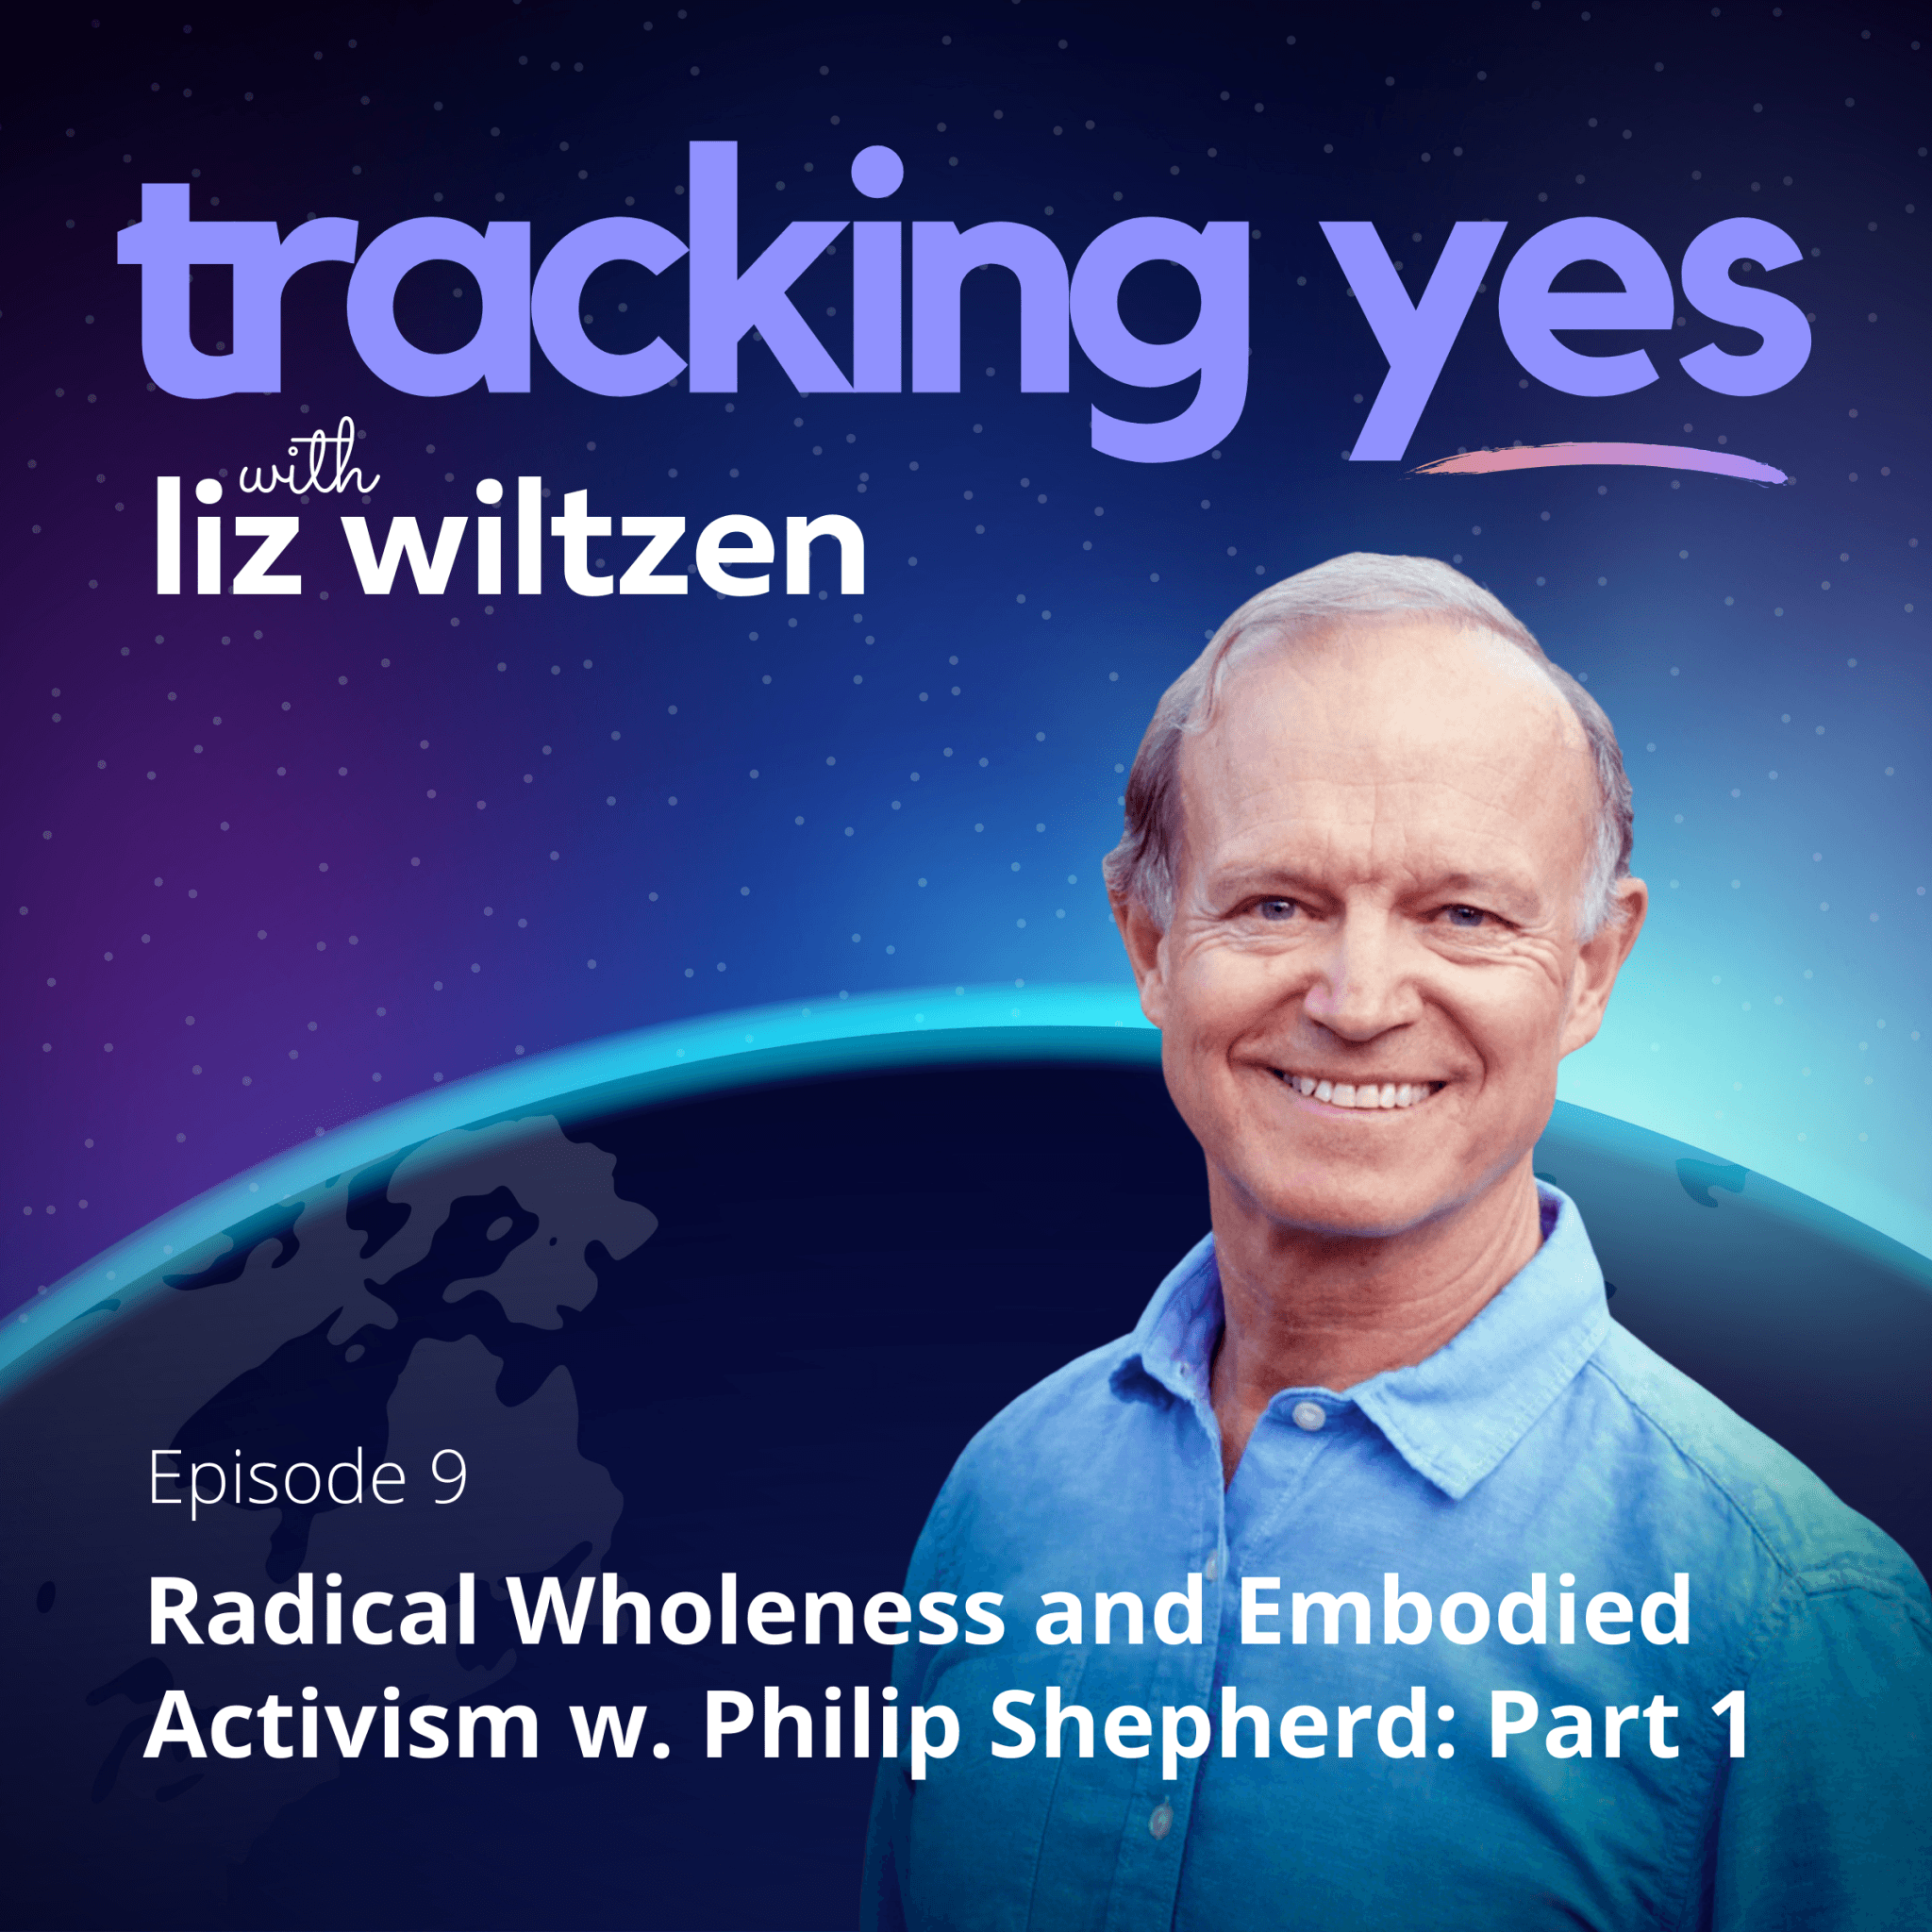 Radical Wholeness and Embodied Activism - The Embodied Present Process